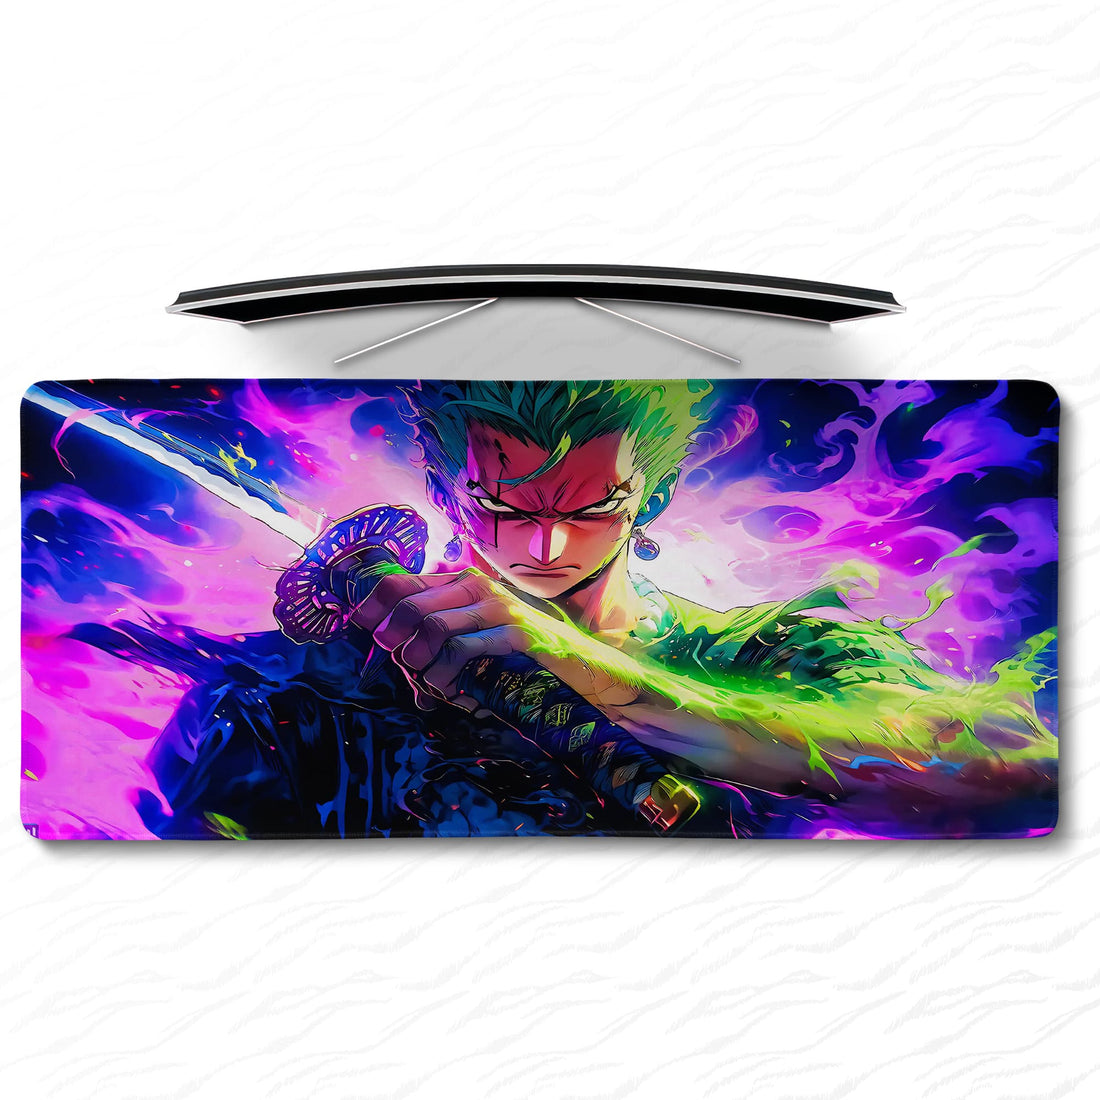 Zoro One Piece Anime Gamer Mouse Pad